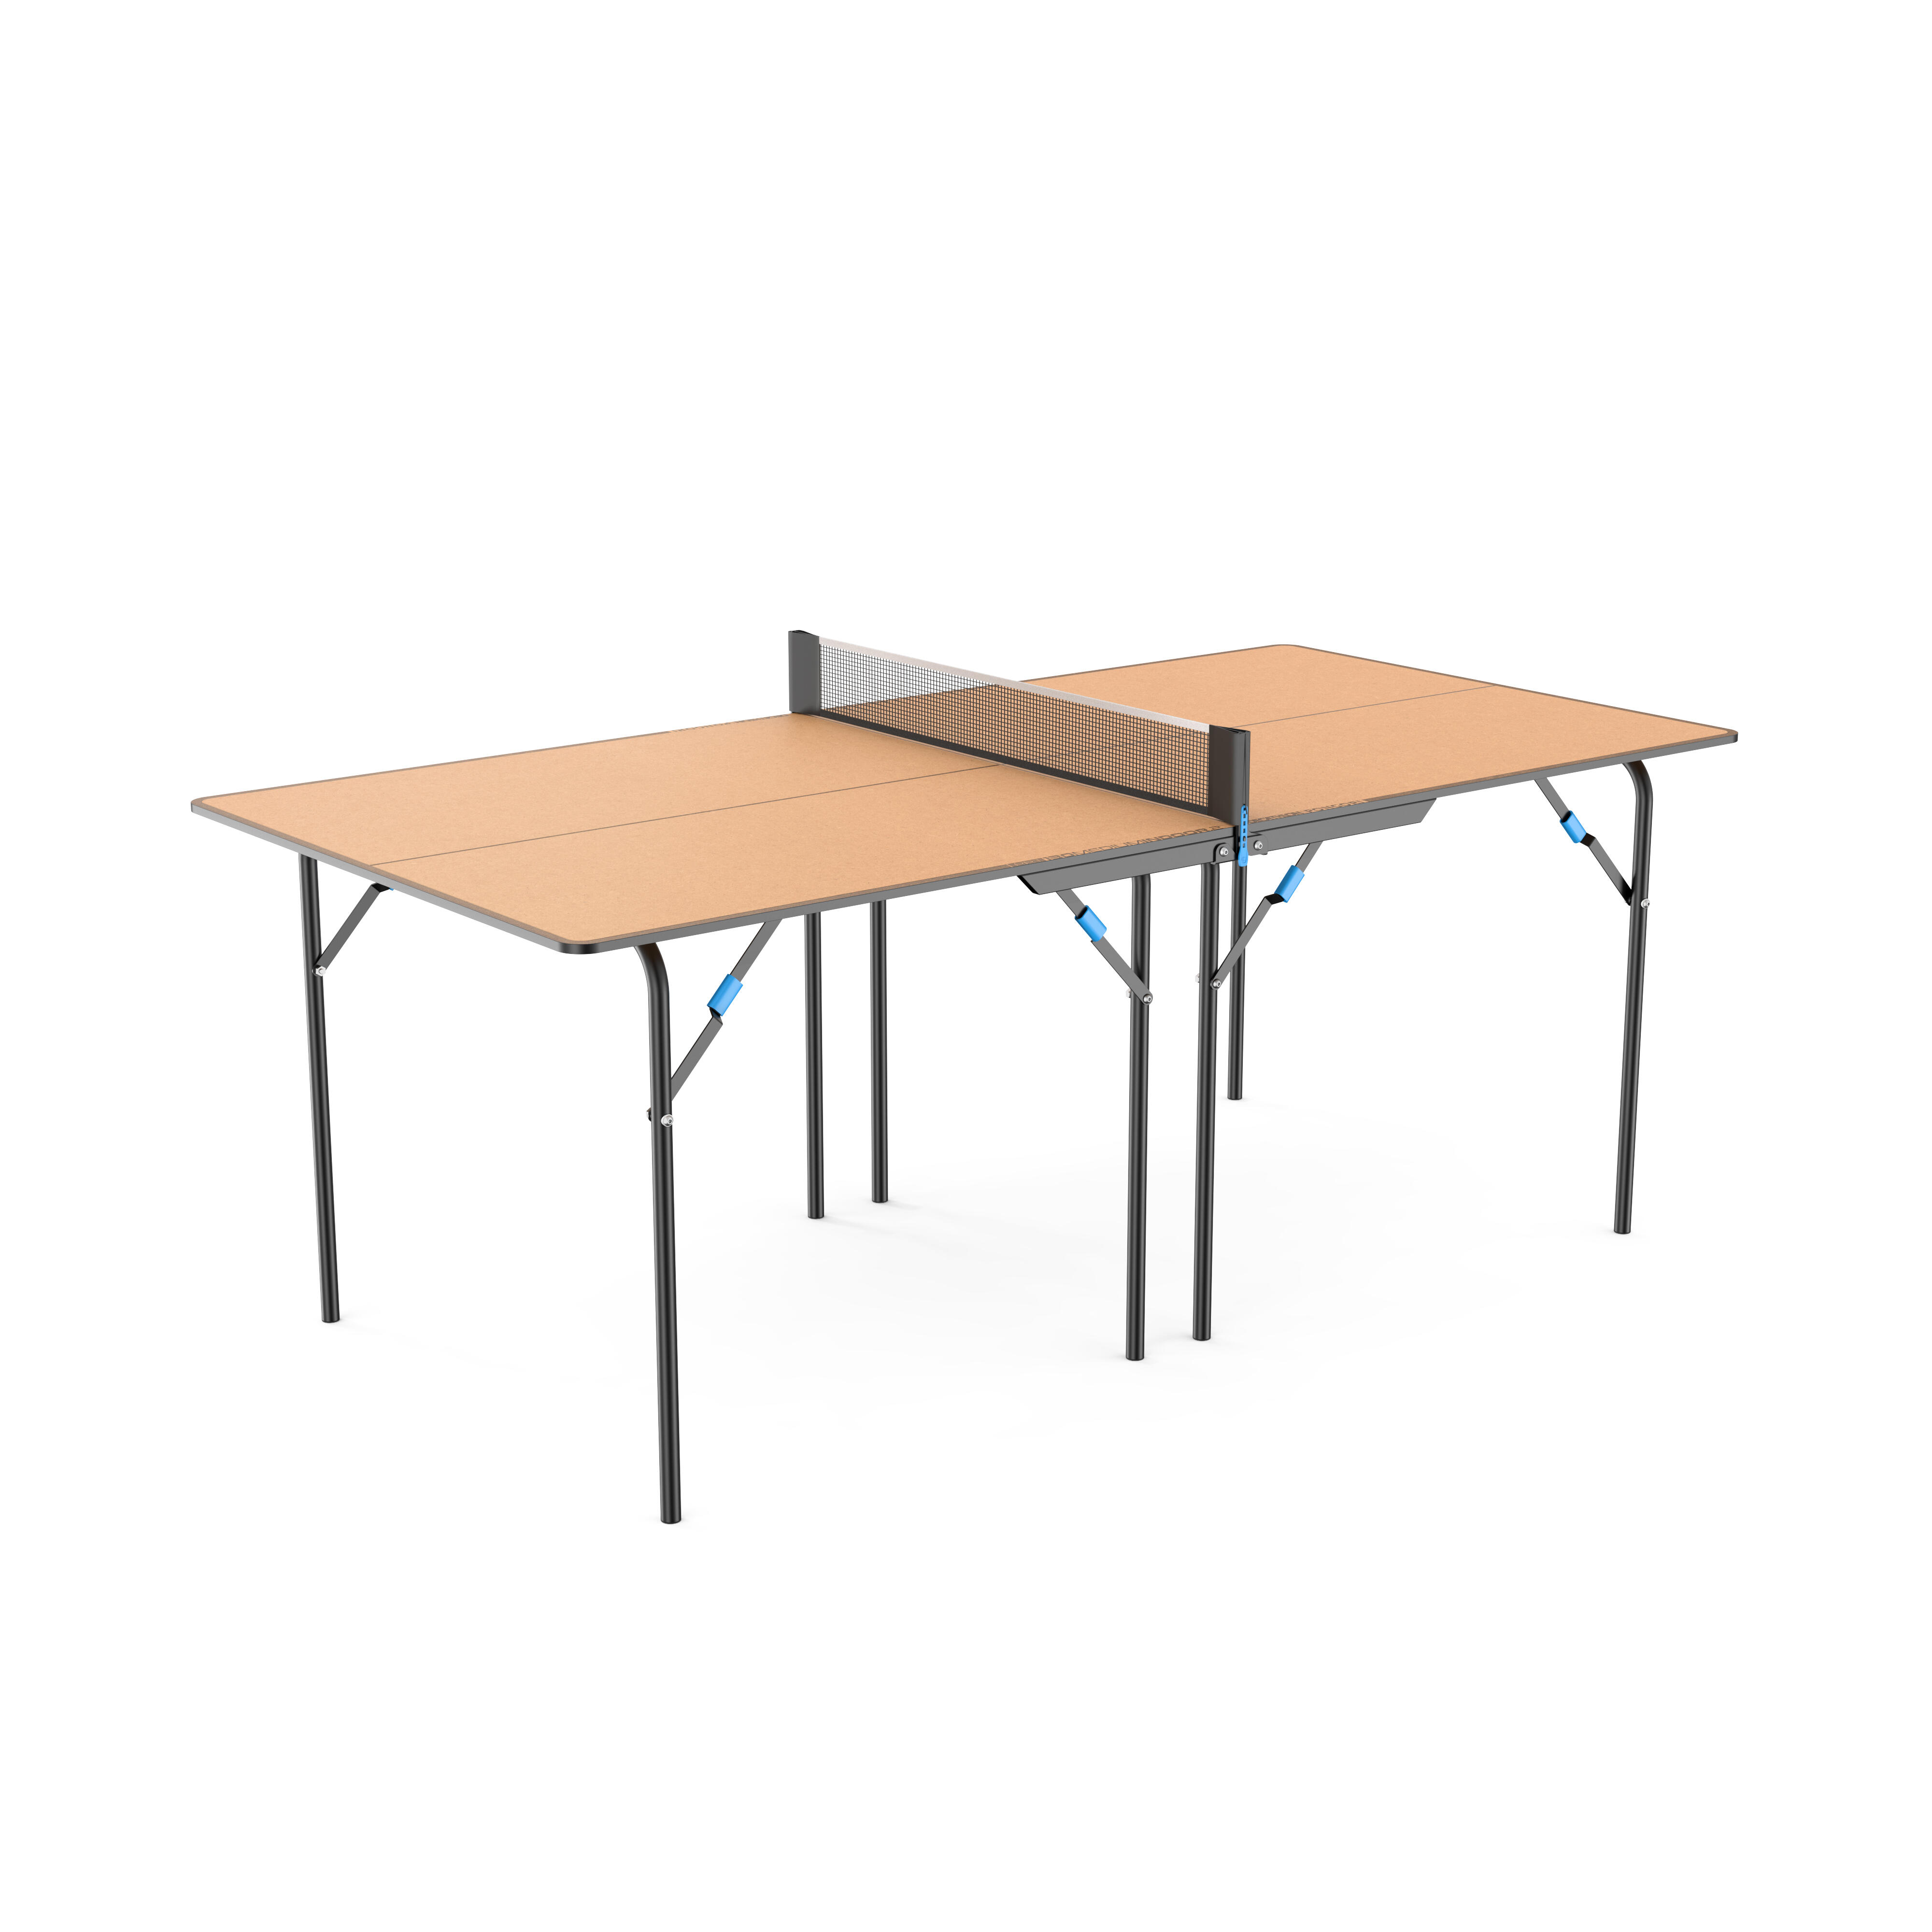 Image of Medium Indoor Table Tennis Table - PPT 130